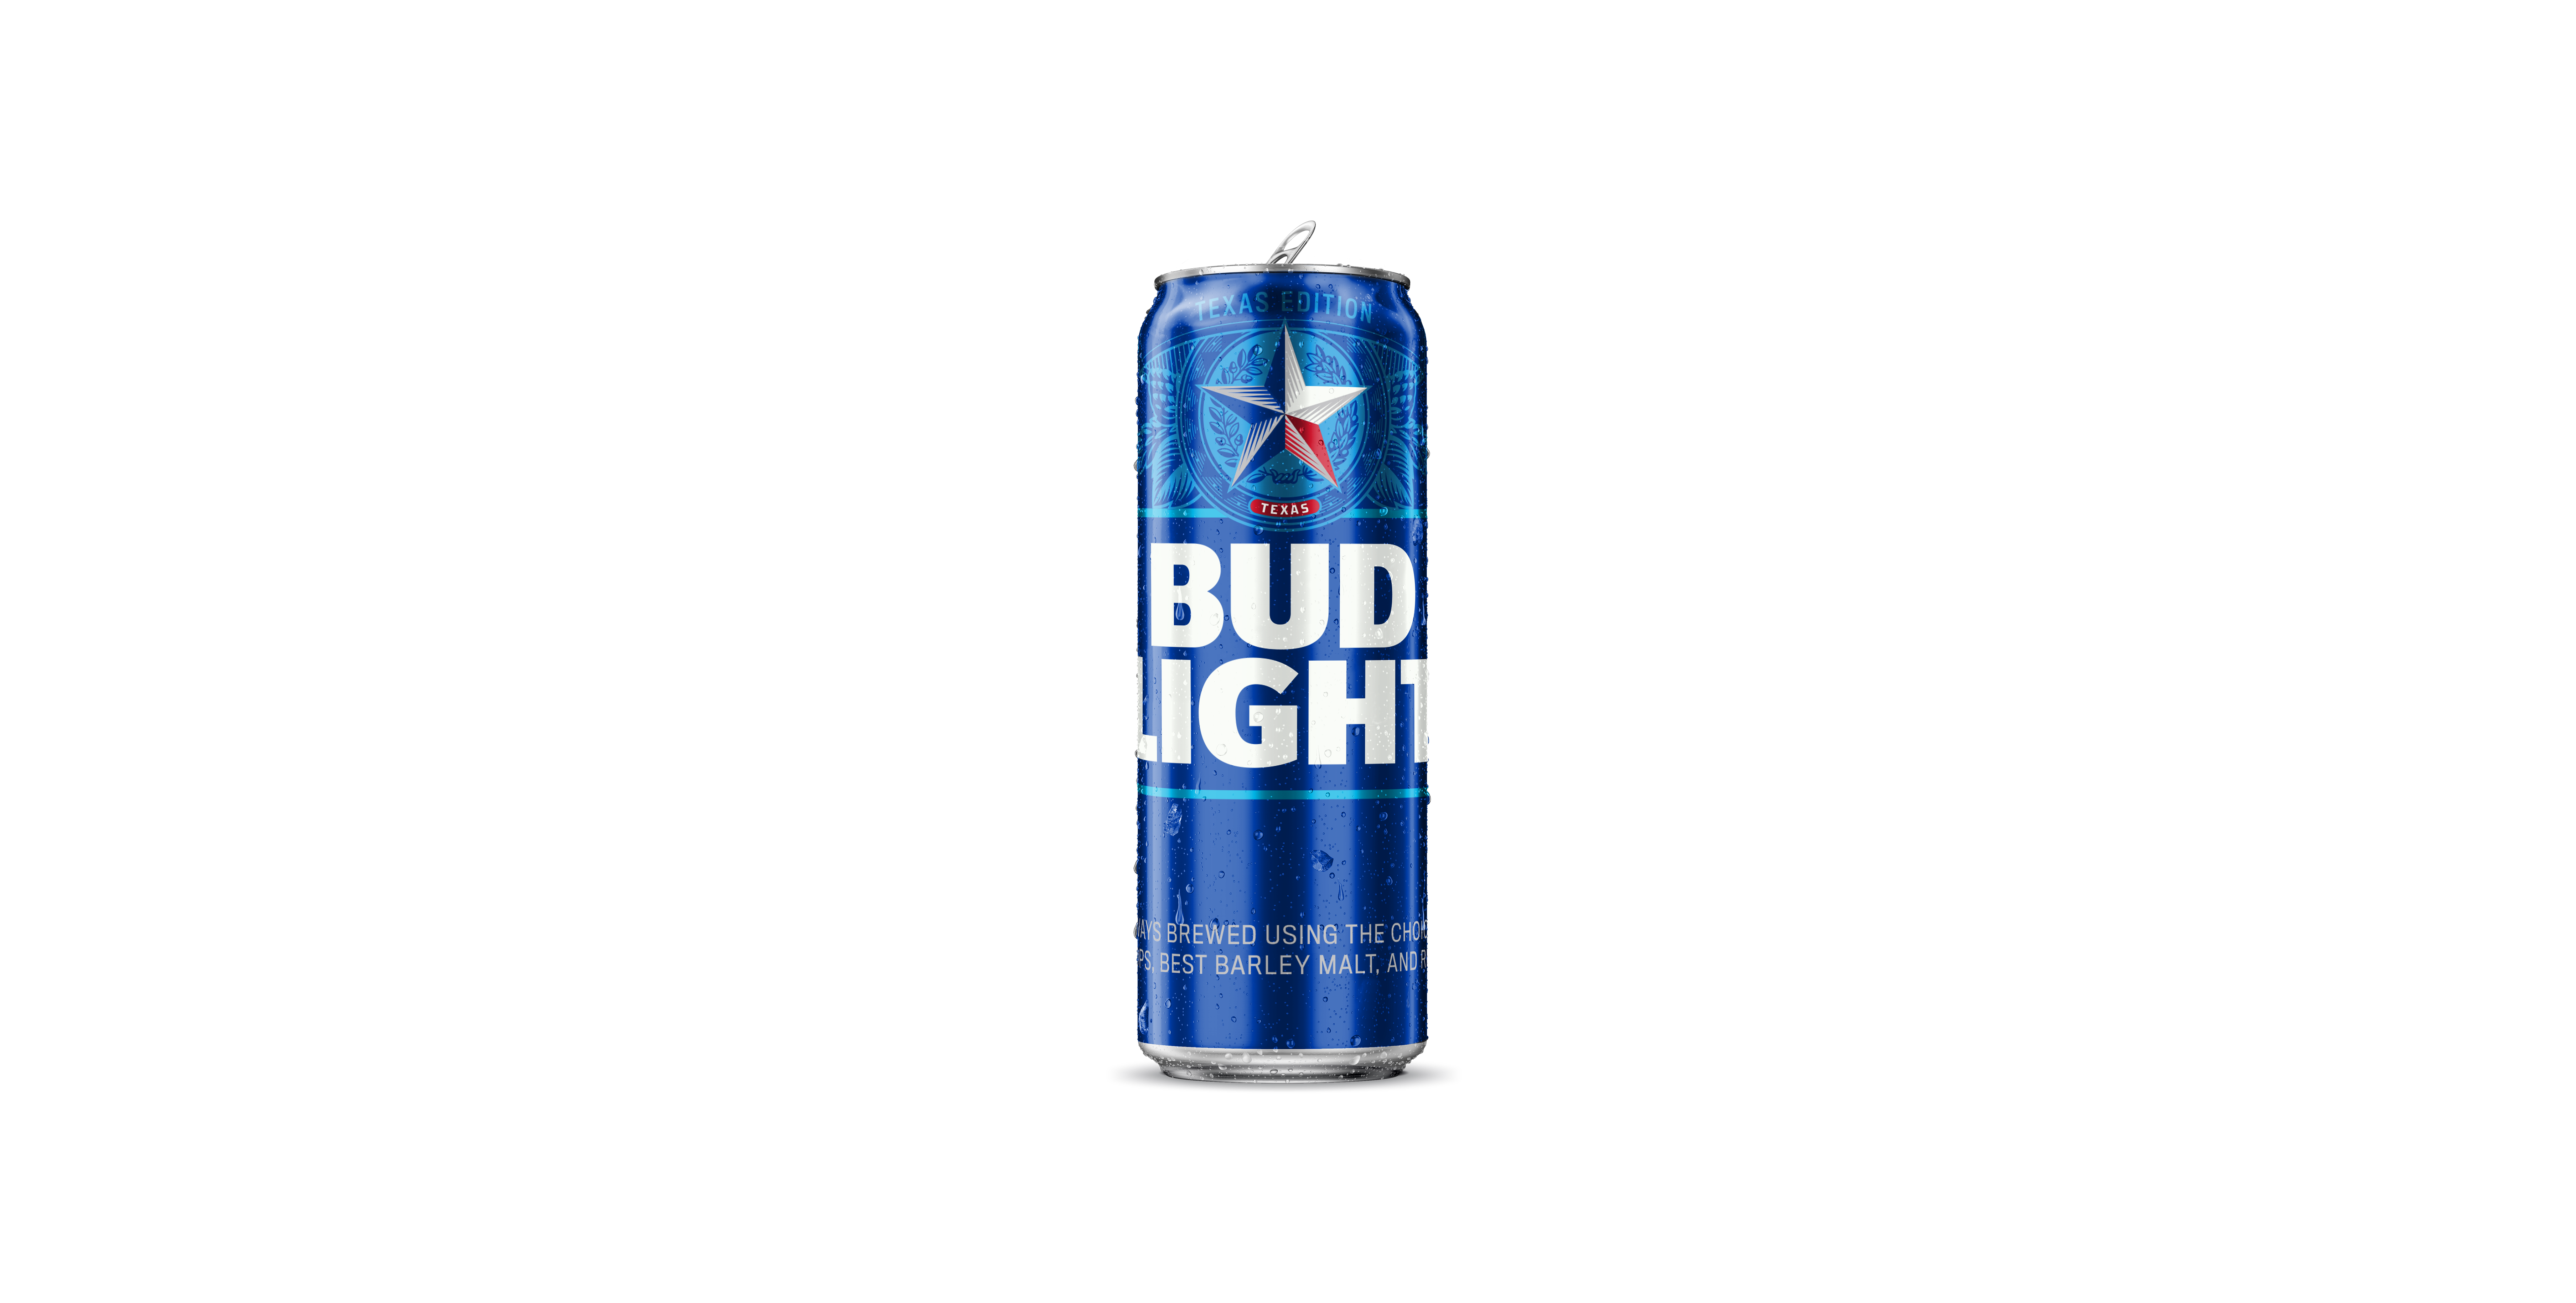 Bud Light panders to Texans with a new can design featuring (gasp) an  actual star on the packaging, San Antonio